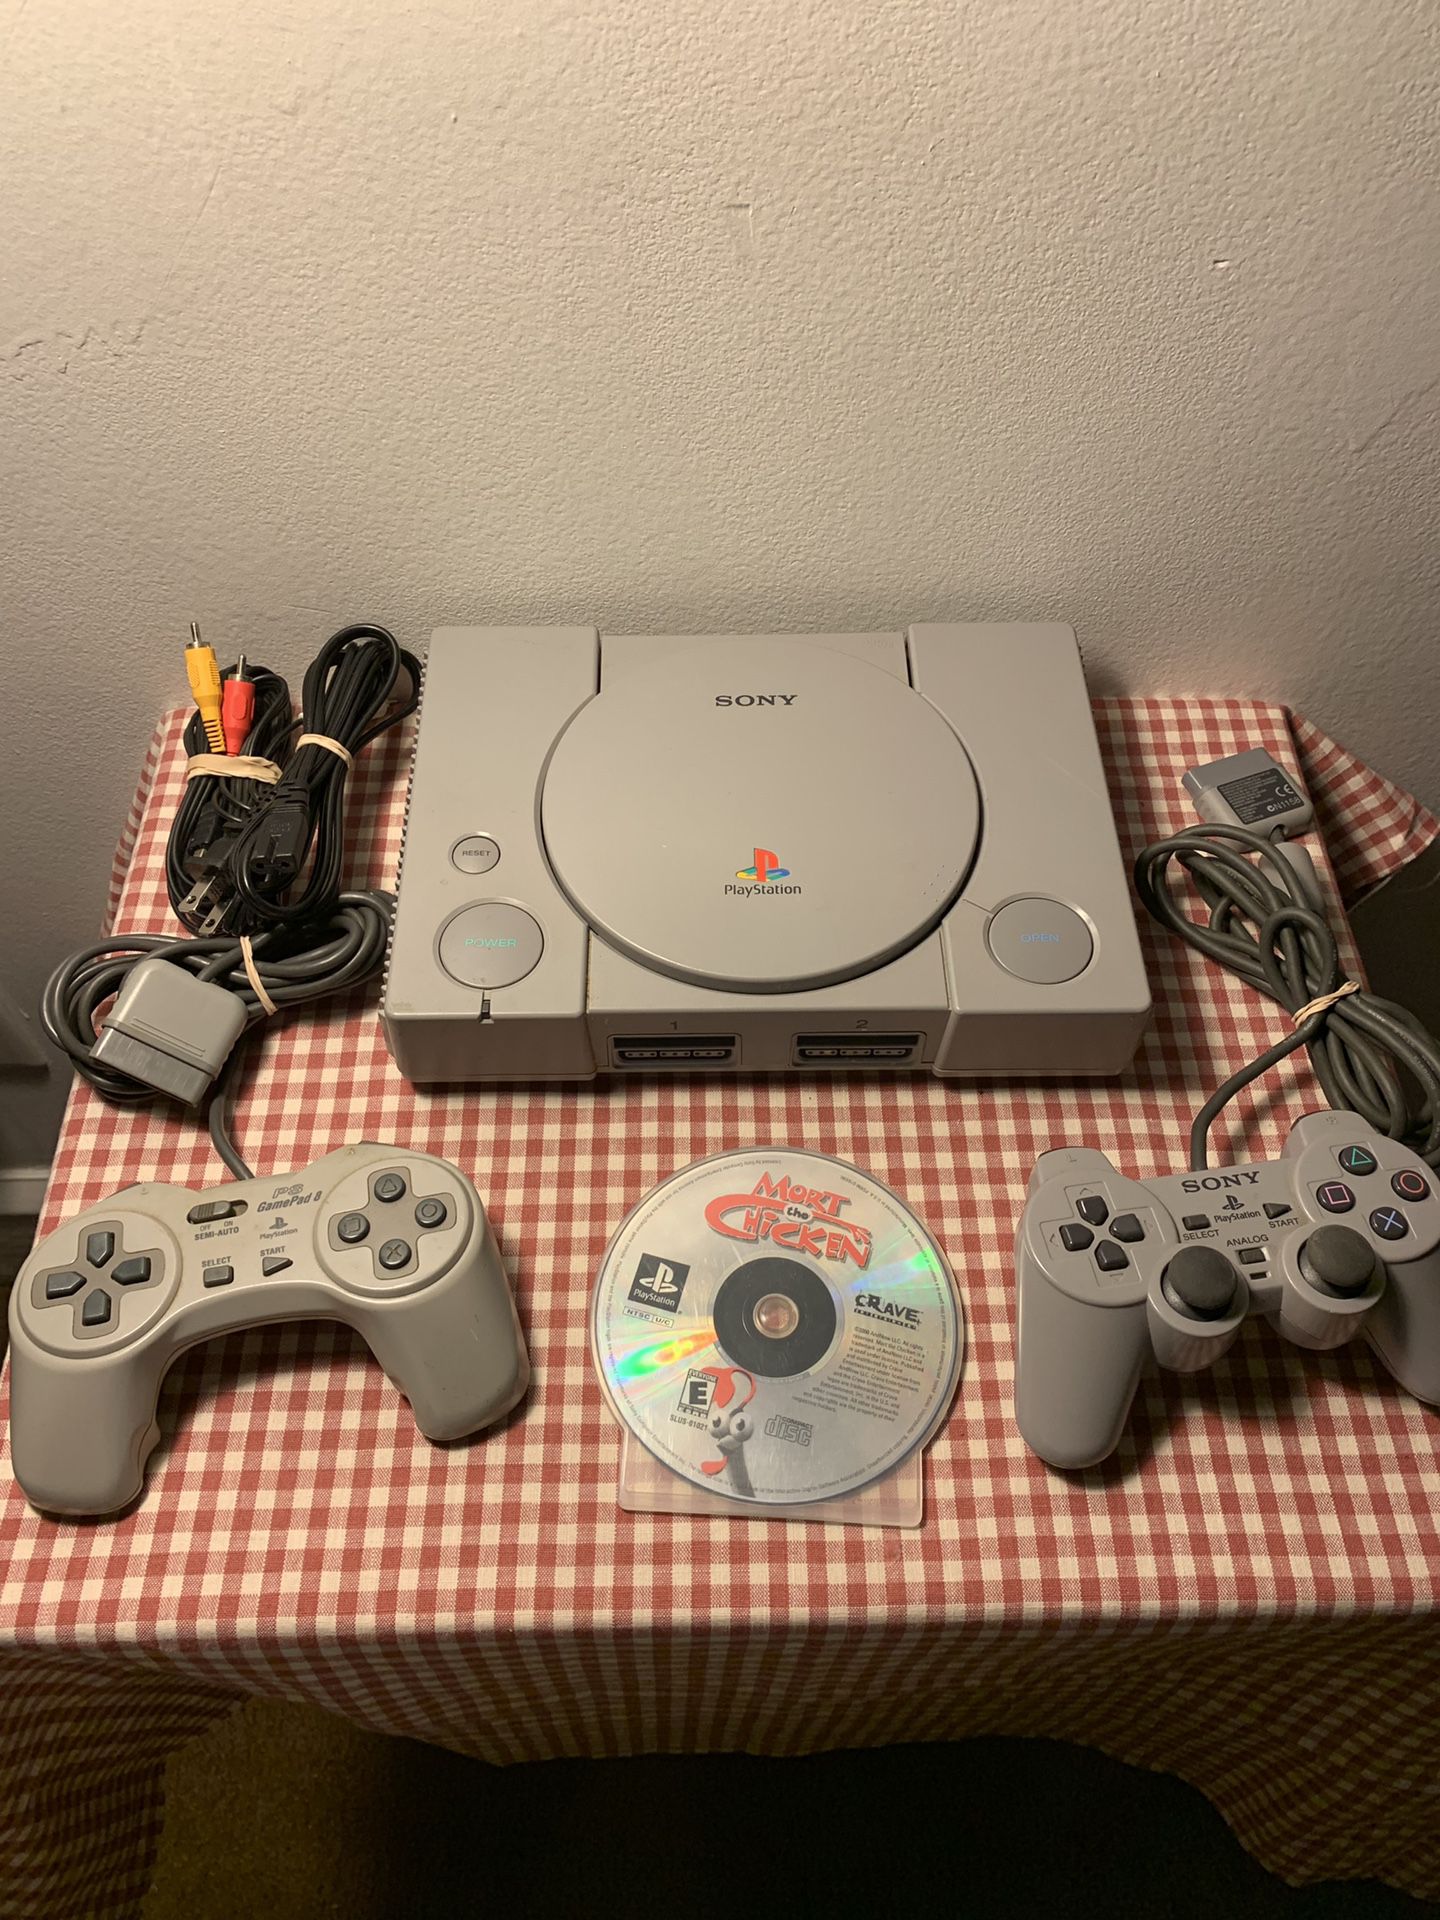 PlayStation 1 PS1 Sony console with two controllers and game